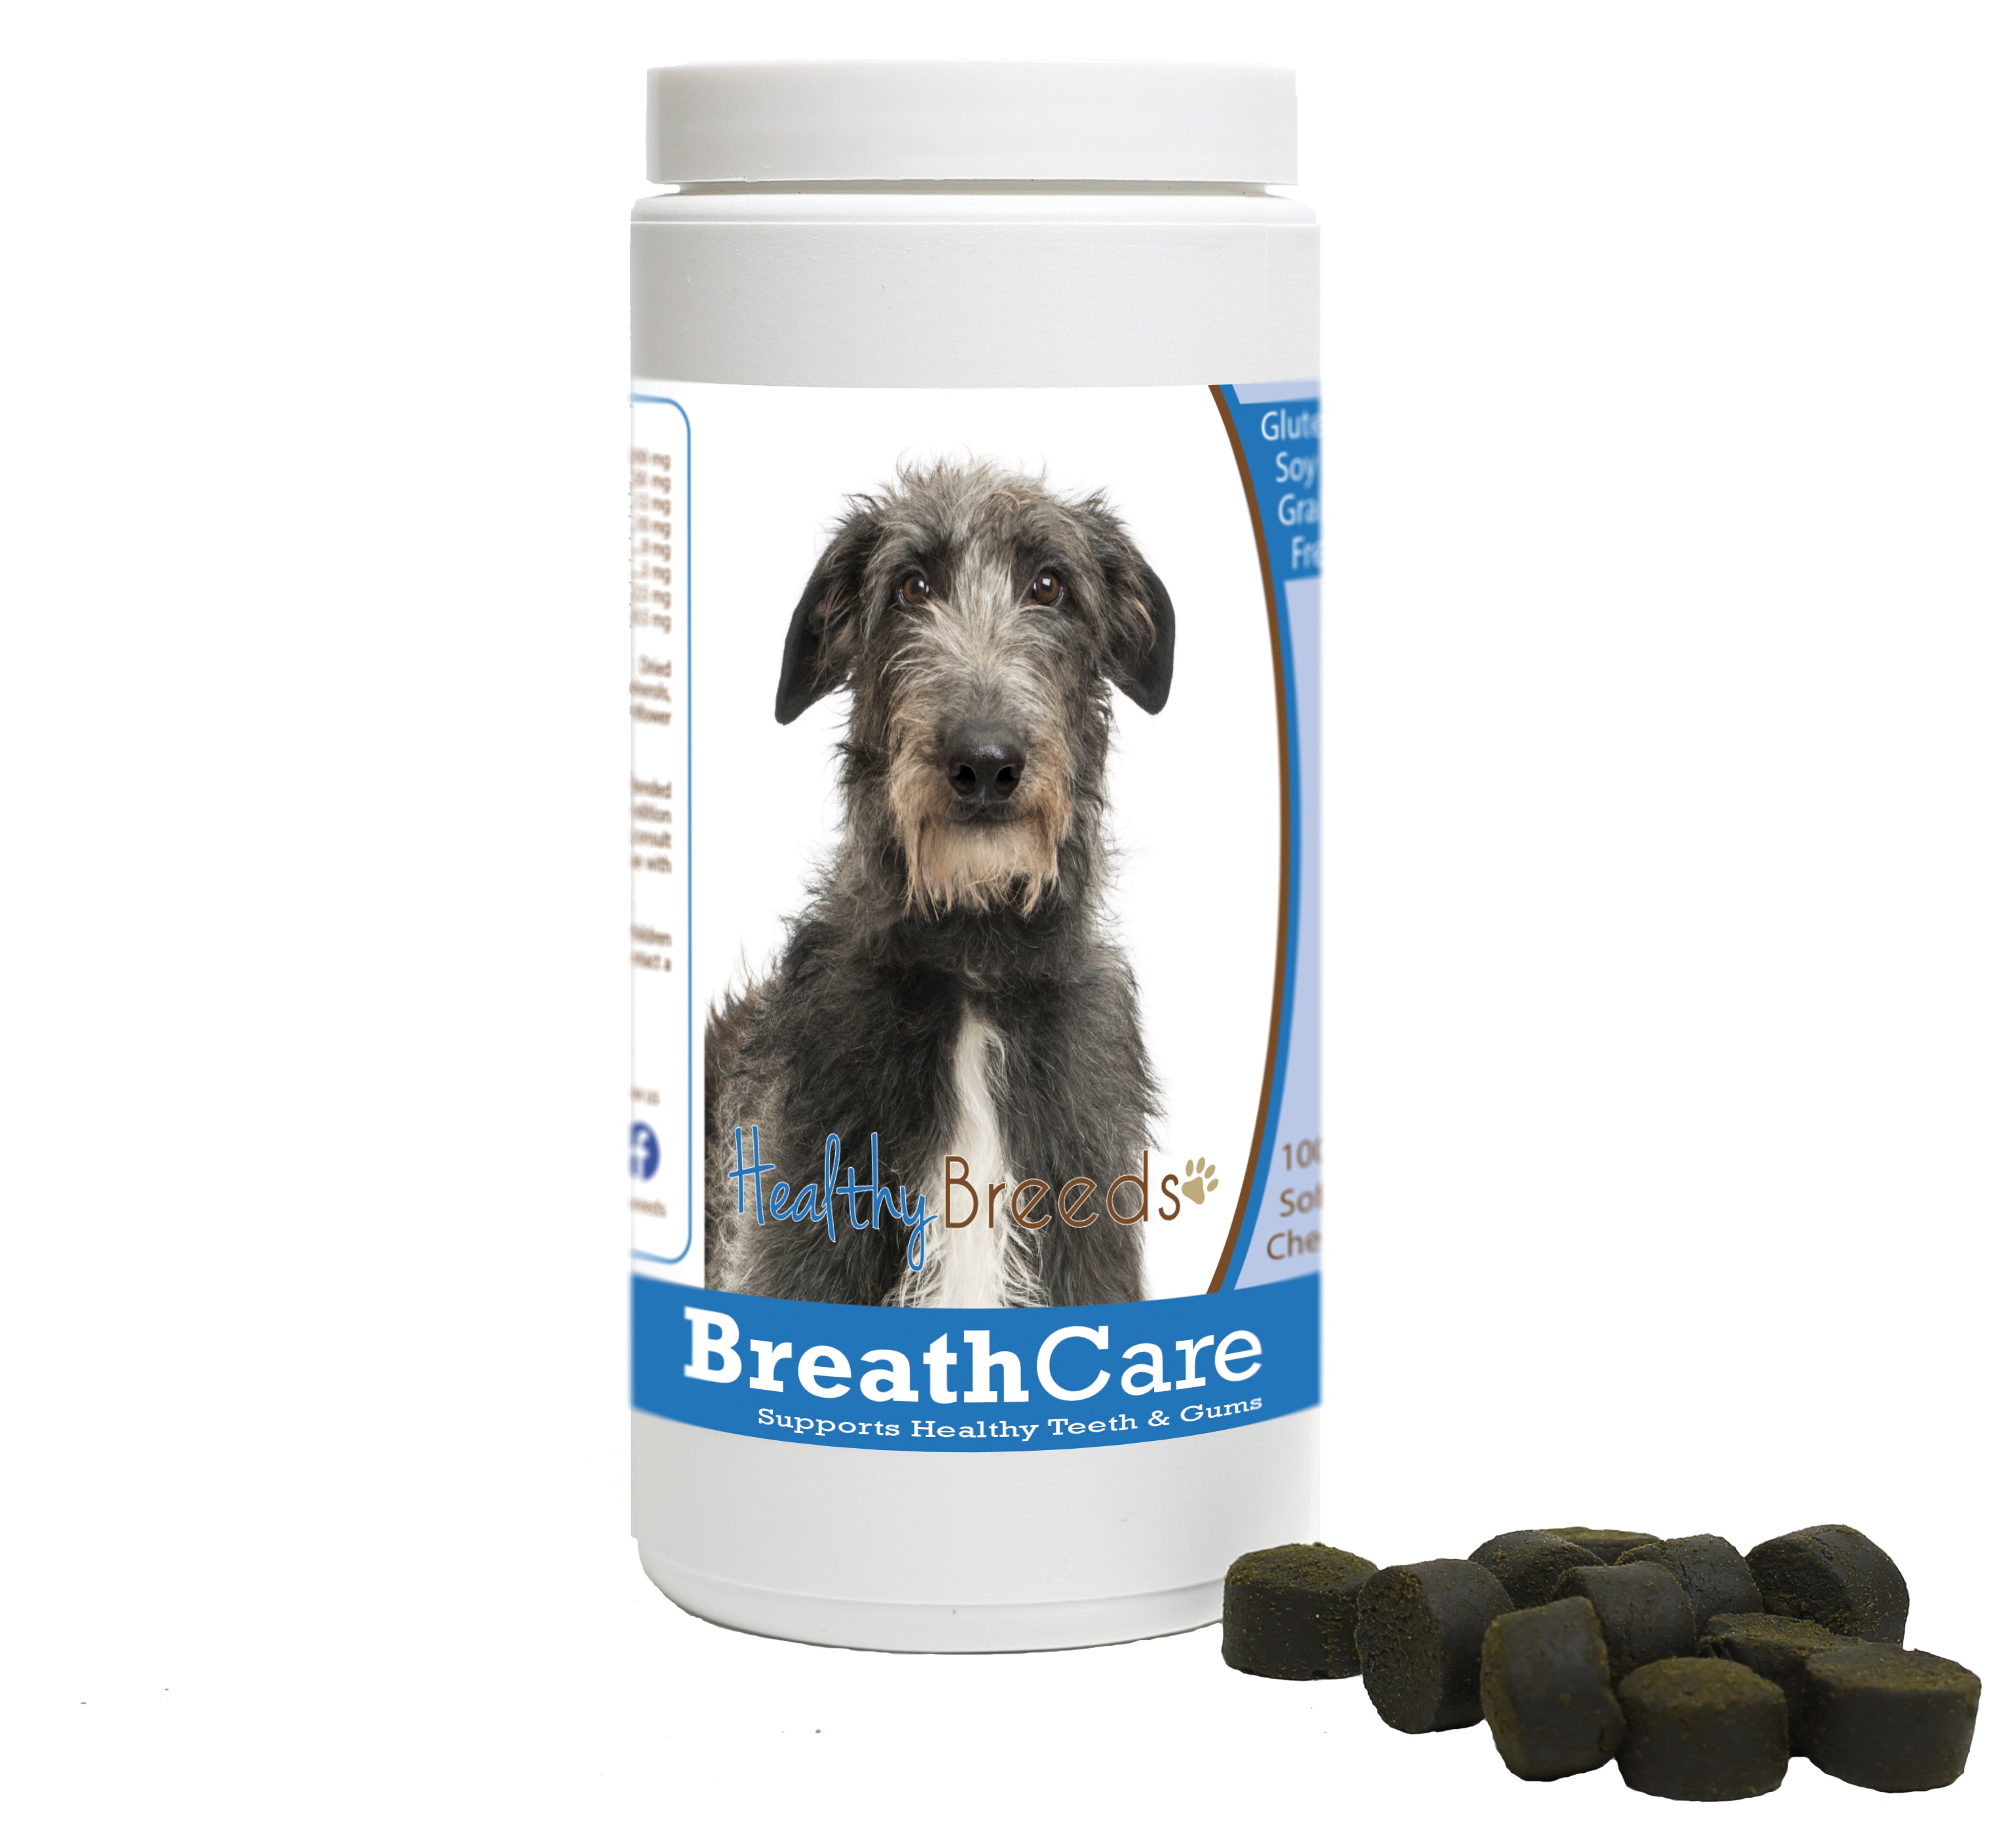 Scottish Deerhound Breath Care Soft Chews for Dogs 100 Count